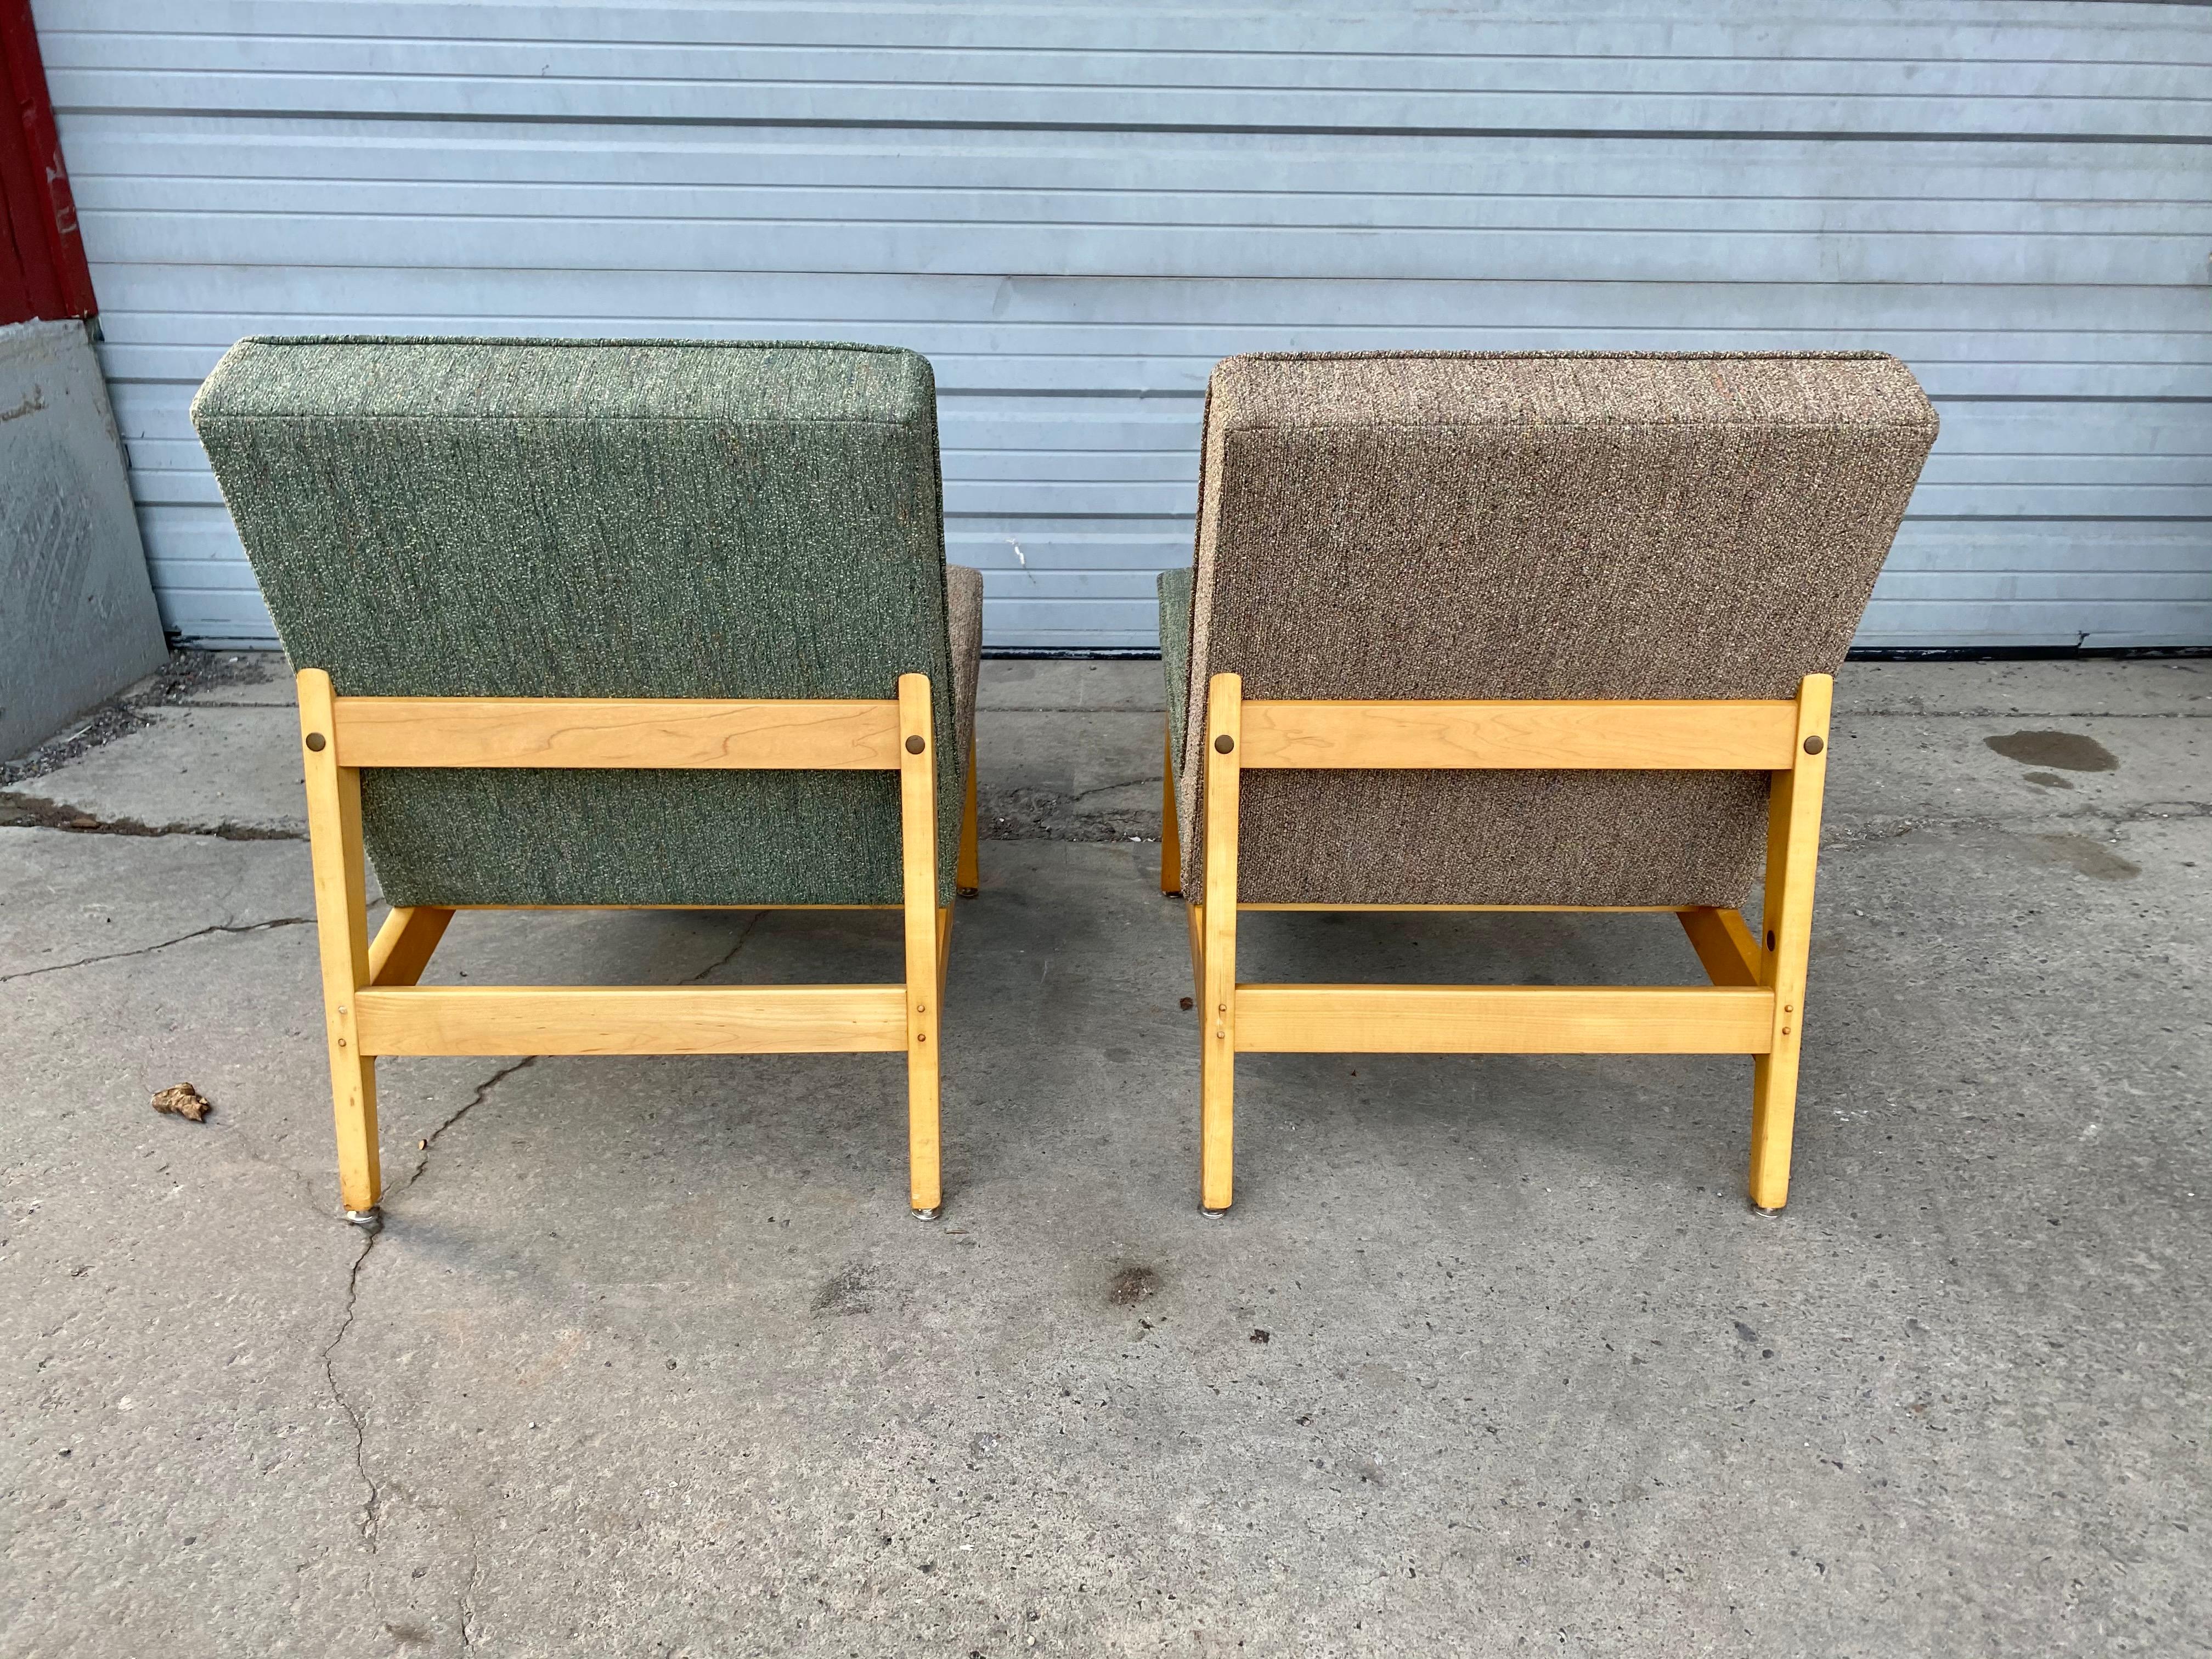 Fabric Stunning Pair of Modernist Lounge Chairs Made by Gunlocke, Manner of Jens Risom